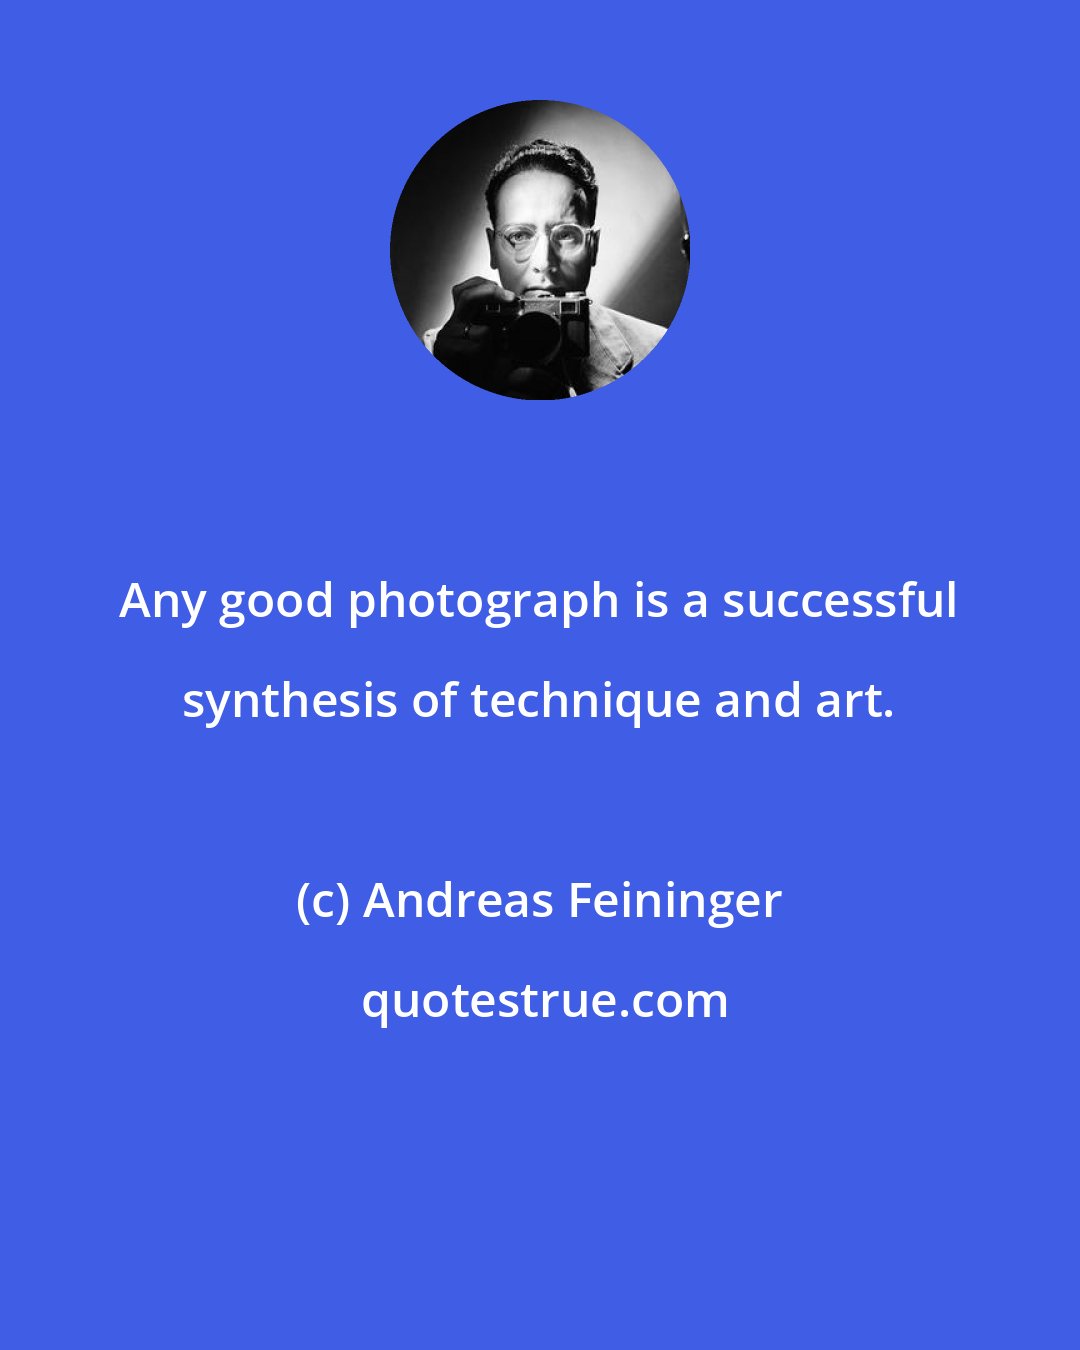 Andreas Feininger: Any good photograph is a successful synthesis of technique and art.